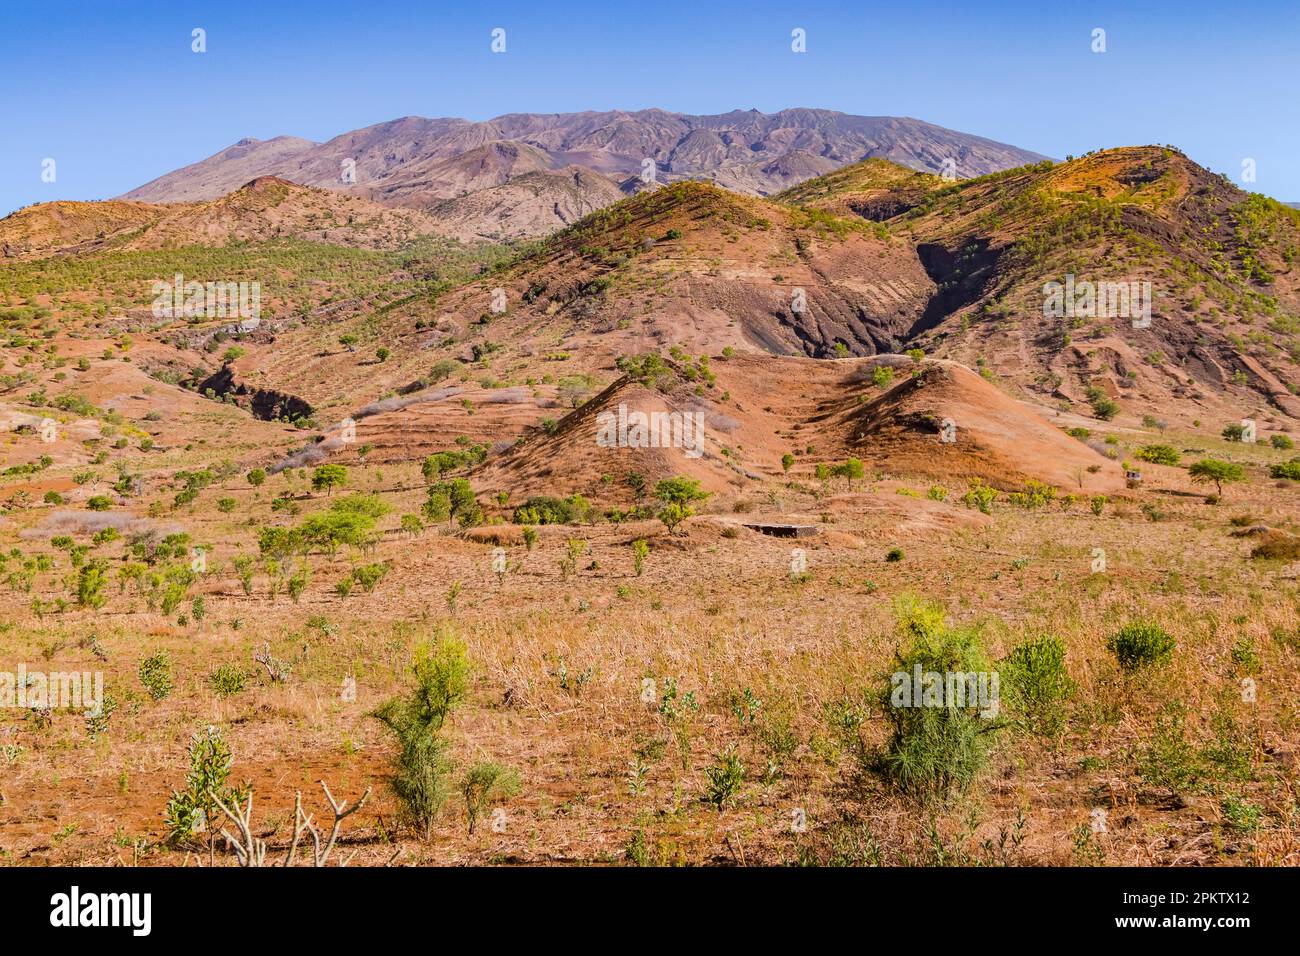 A picturesque mountain slope formed by volcanism overgrown with grass and bushes, Fogo Island, Cape Verde Islands Stock Photo